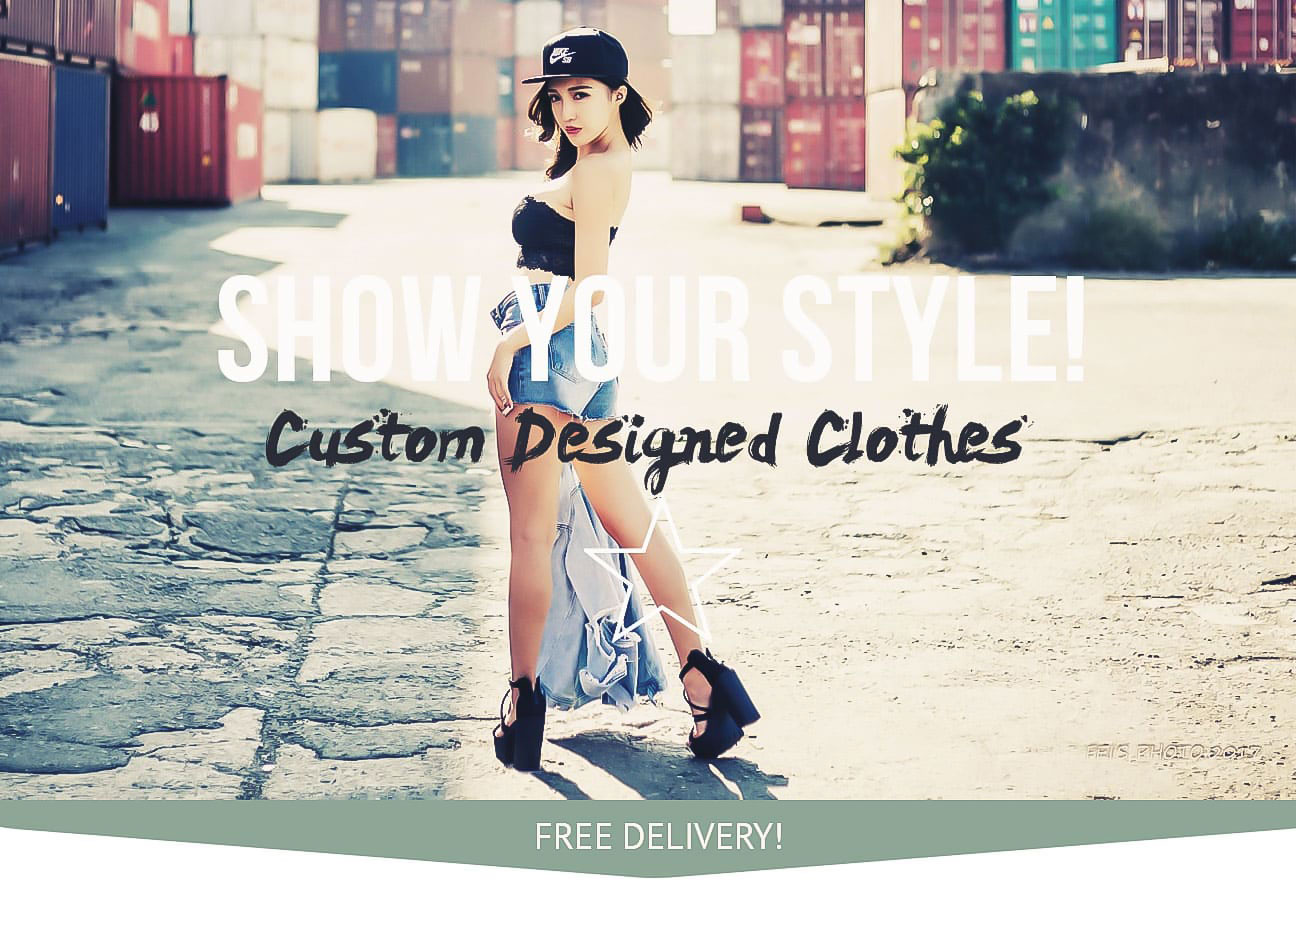 street wear, t-shirts, hoodies, tops, baseball caps, shoes - free delivery - yipe clothing